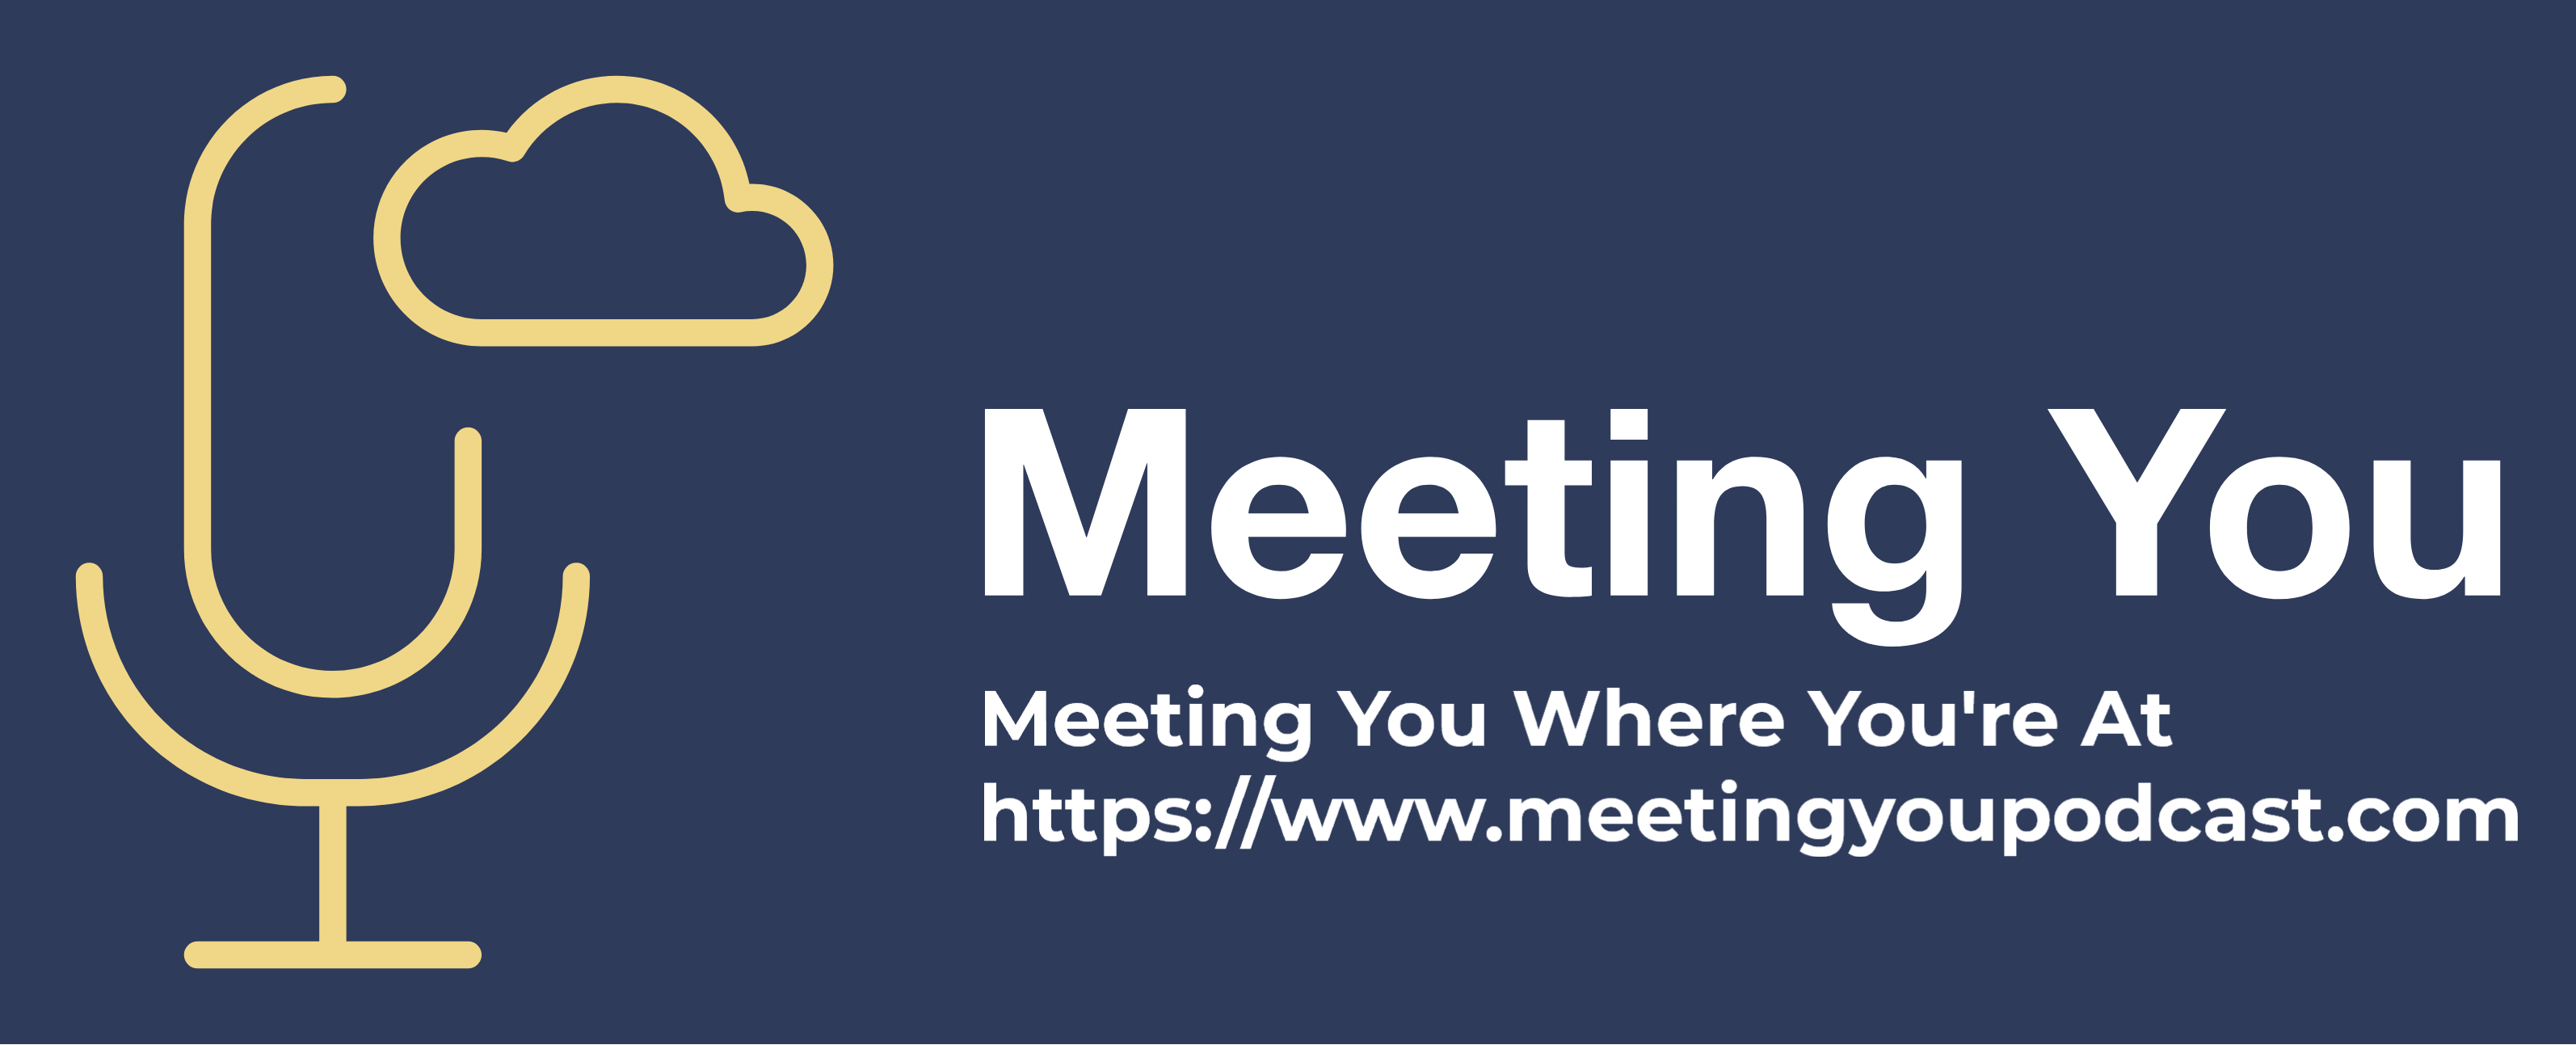 Meeting You Podcast, an IT Squared LLC Production